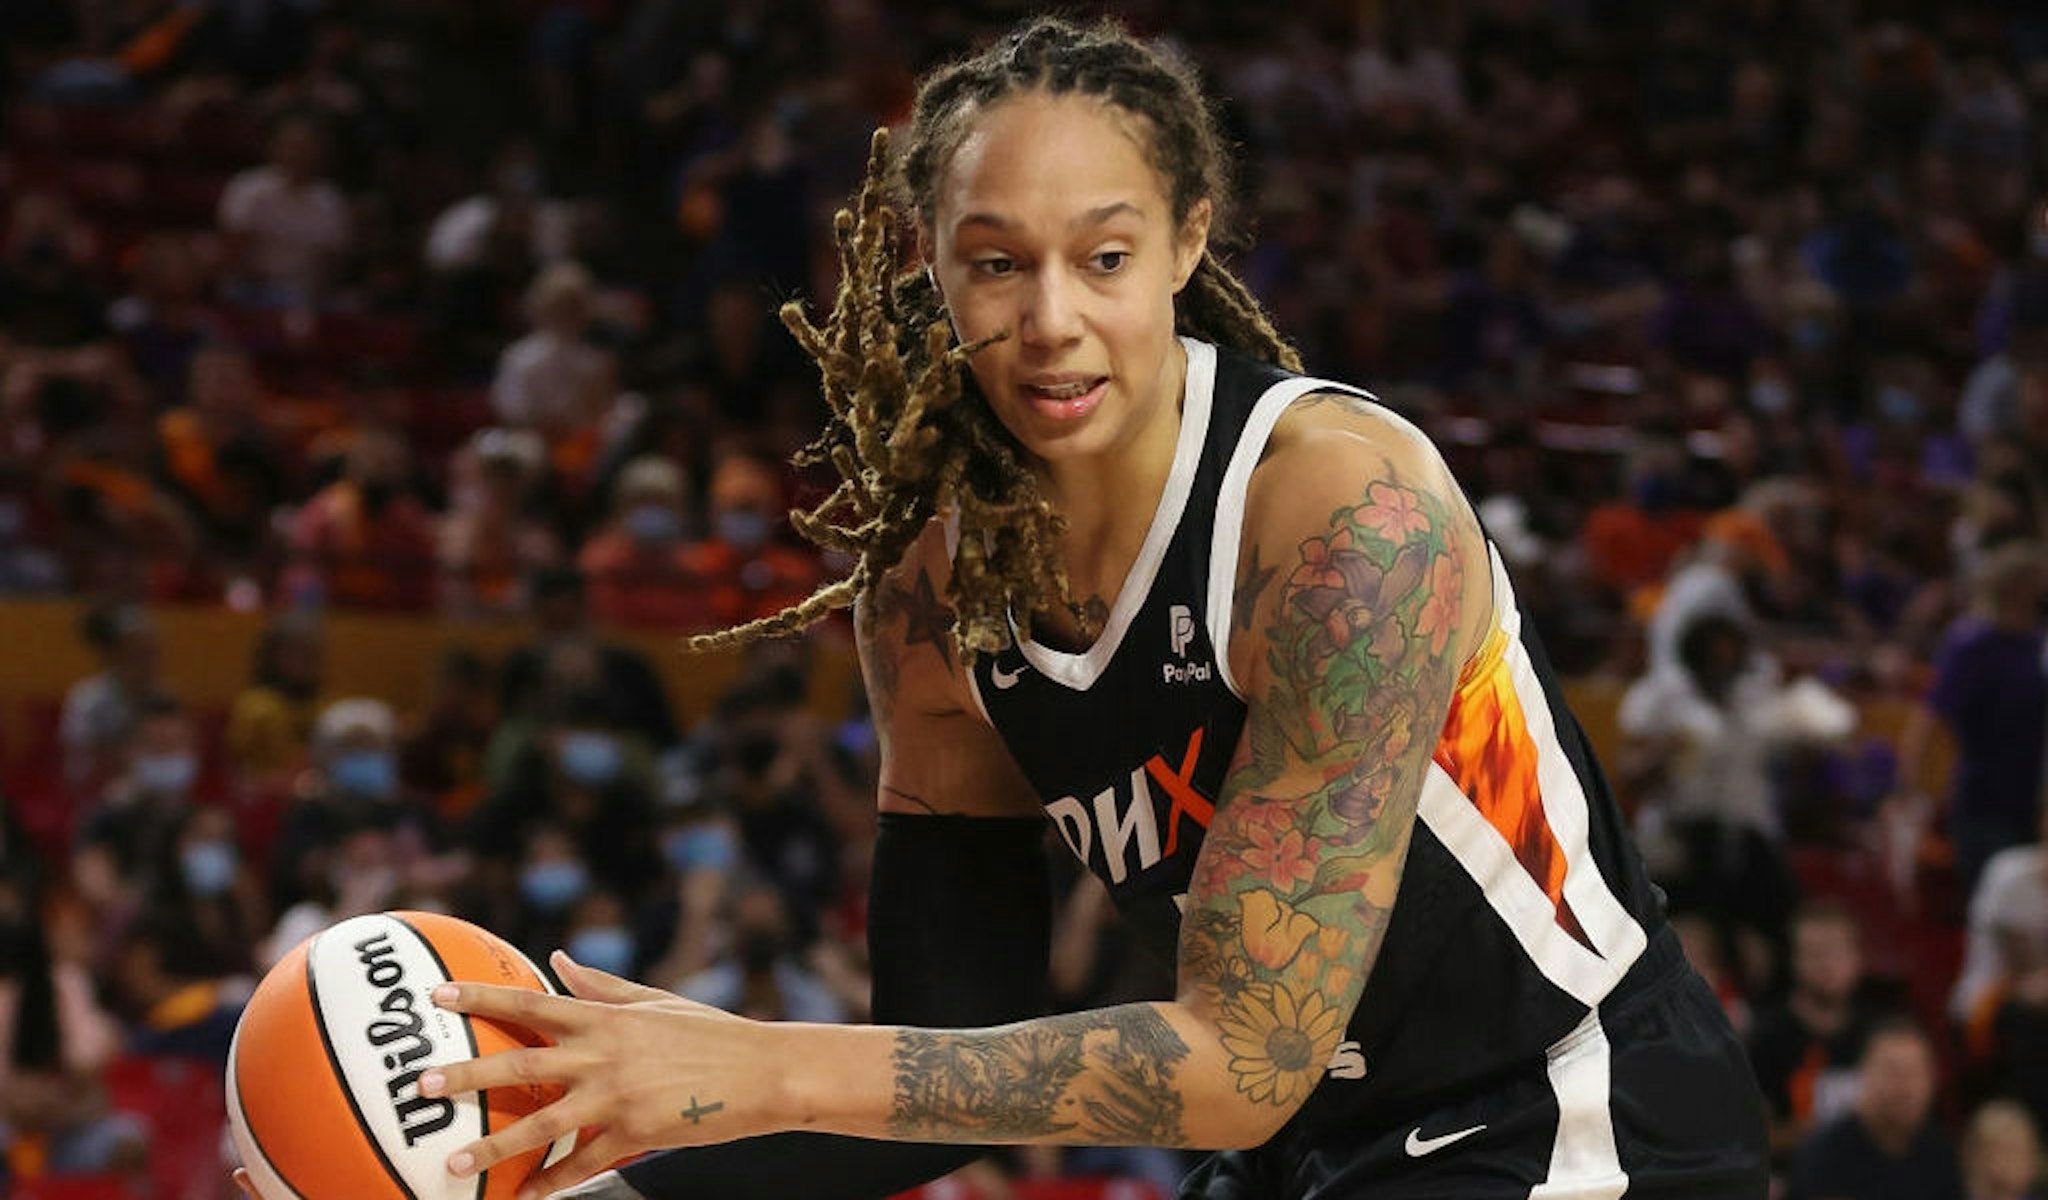 Wnba Star Brittney Griner Freed From Russian Prison In Swap For Arms 